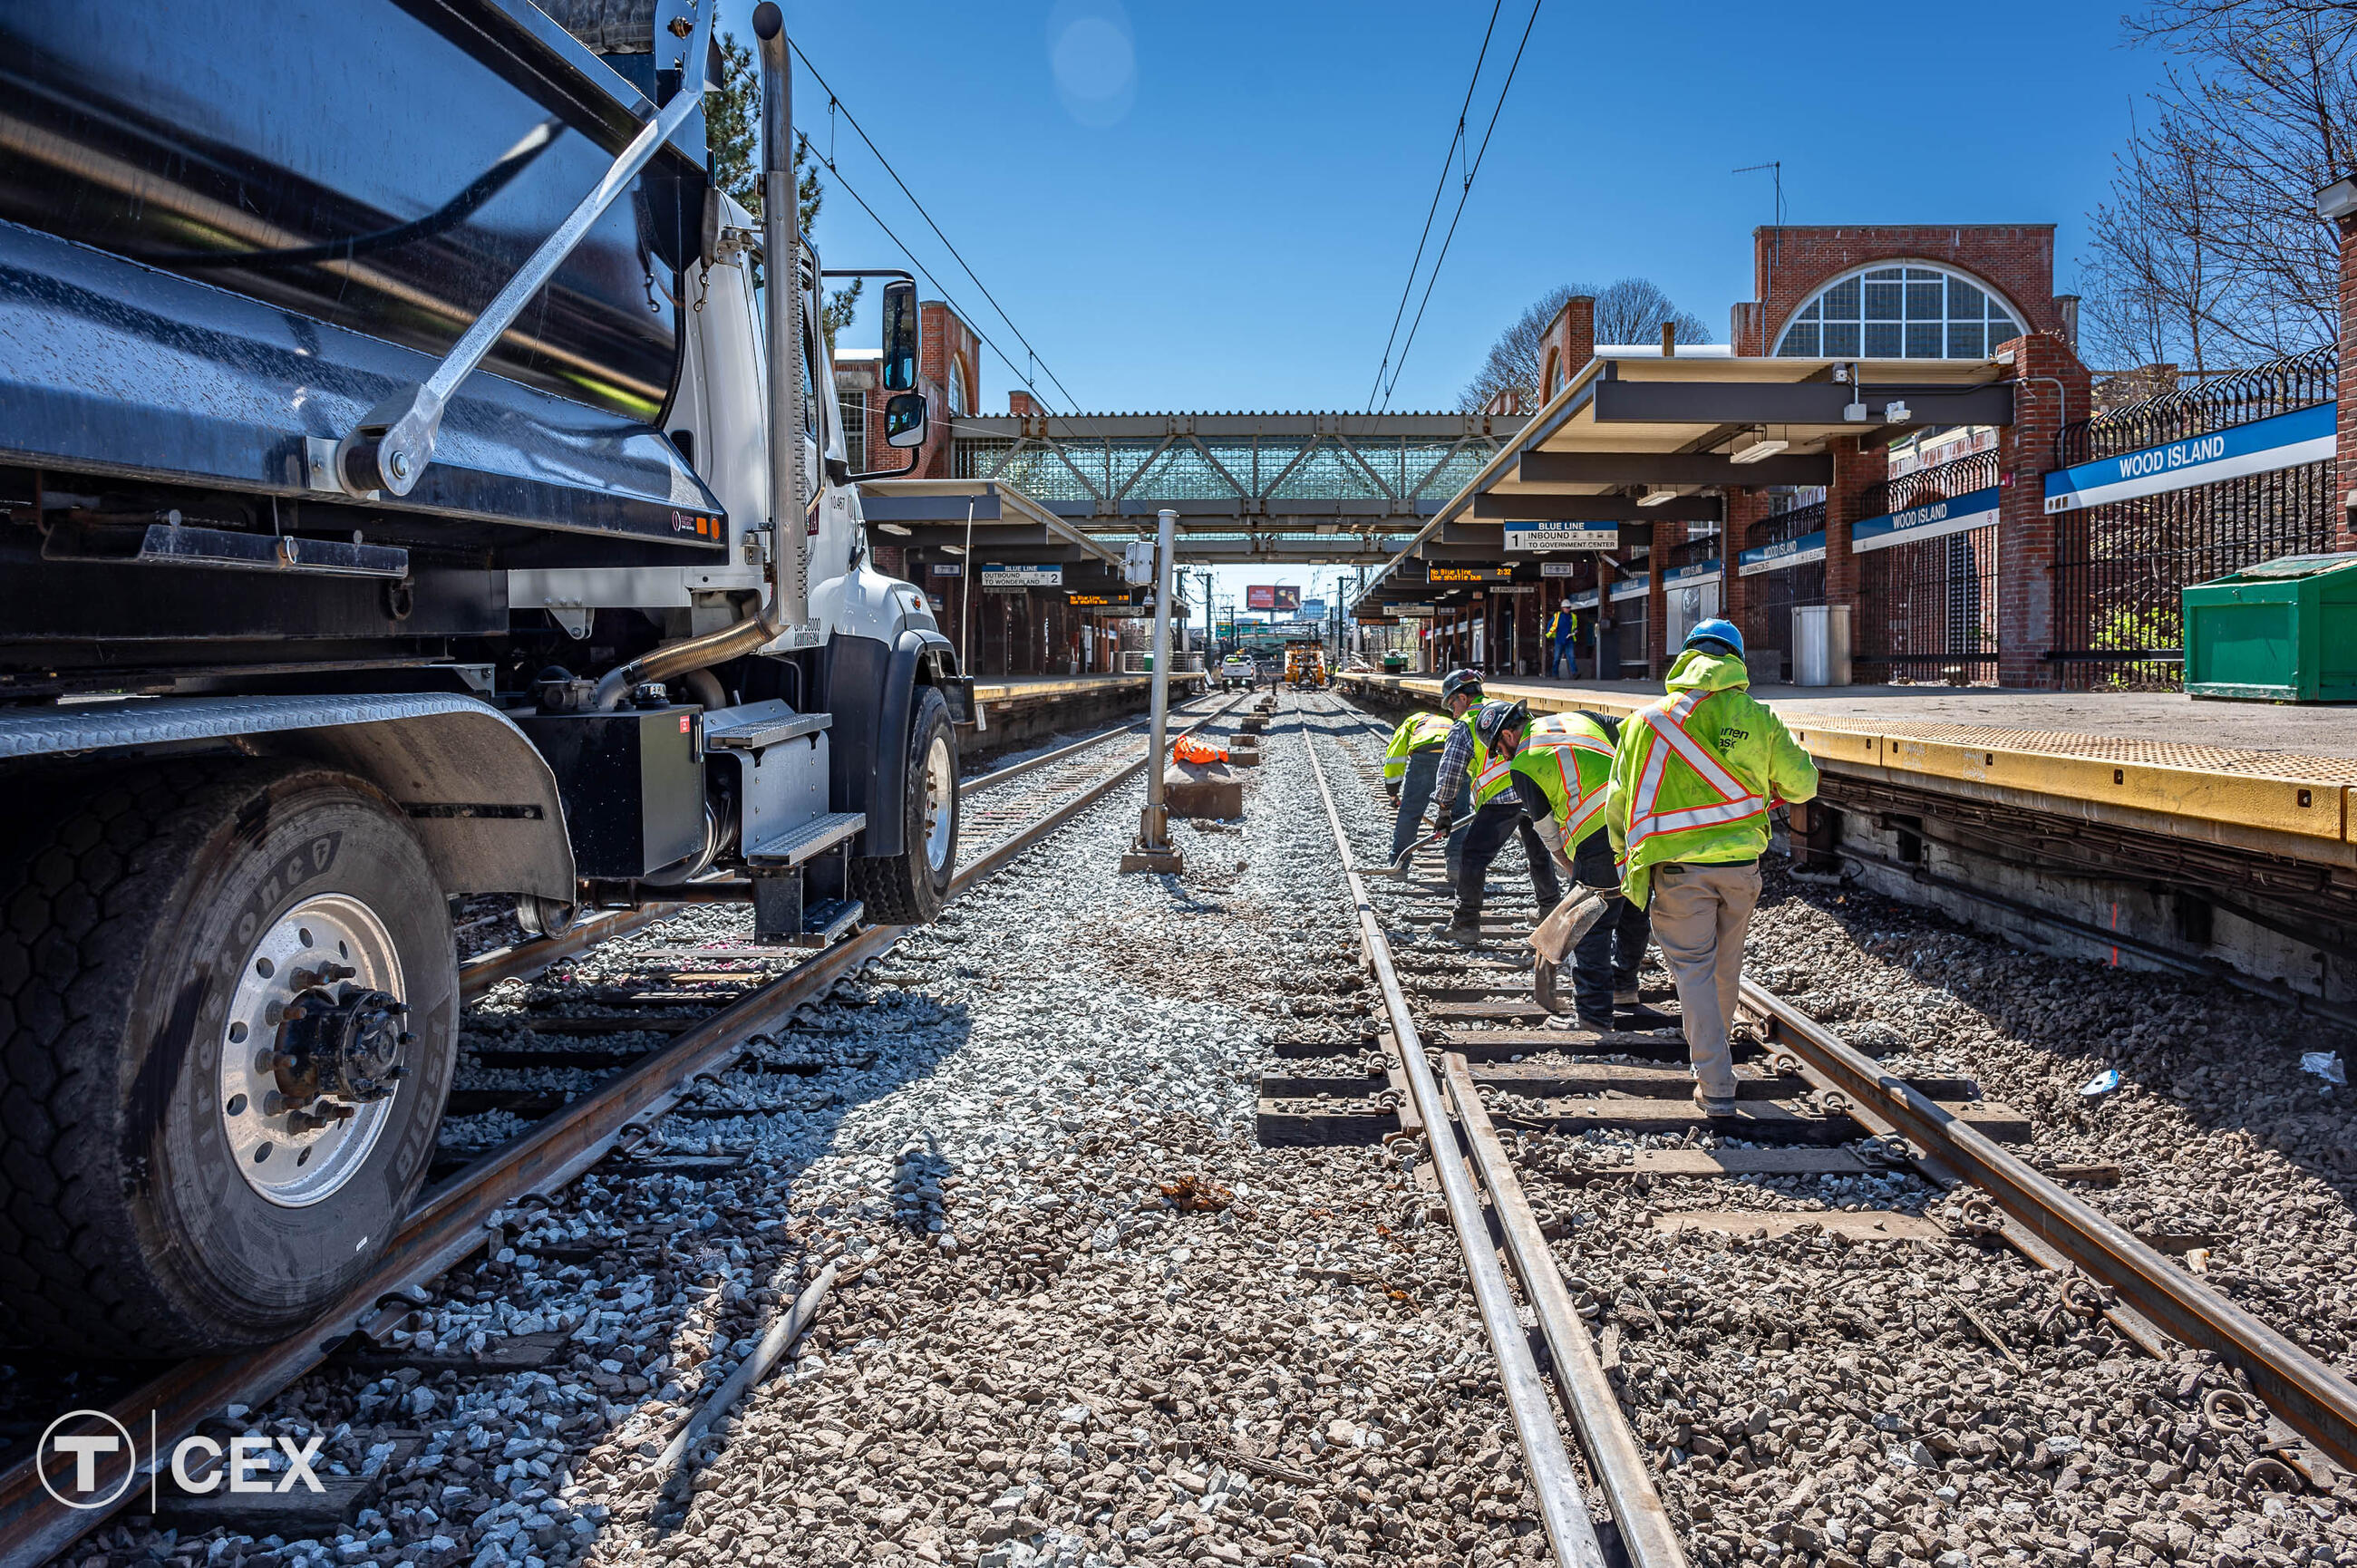 Crews performed track and tie replacement work along the Blue Line at Wood Island station. Complimentary photo by the MBTA Customer and Employee Experience Department.